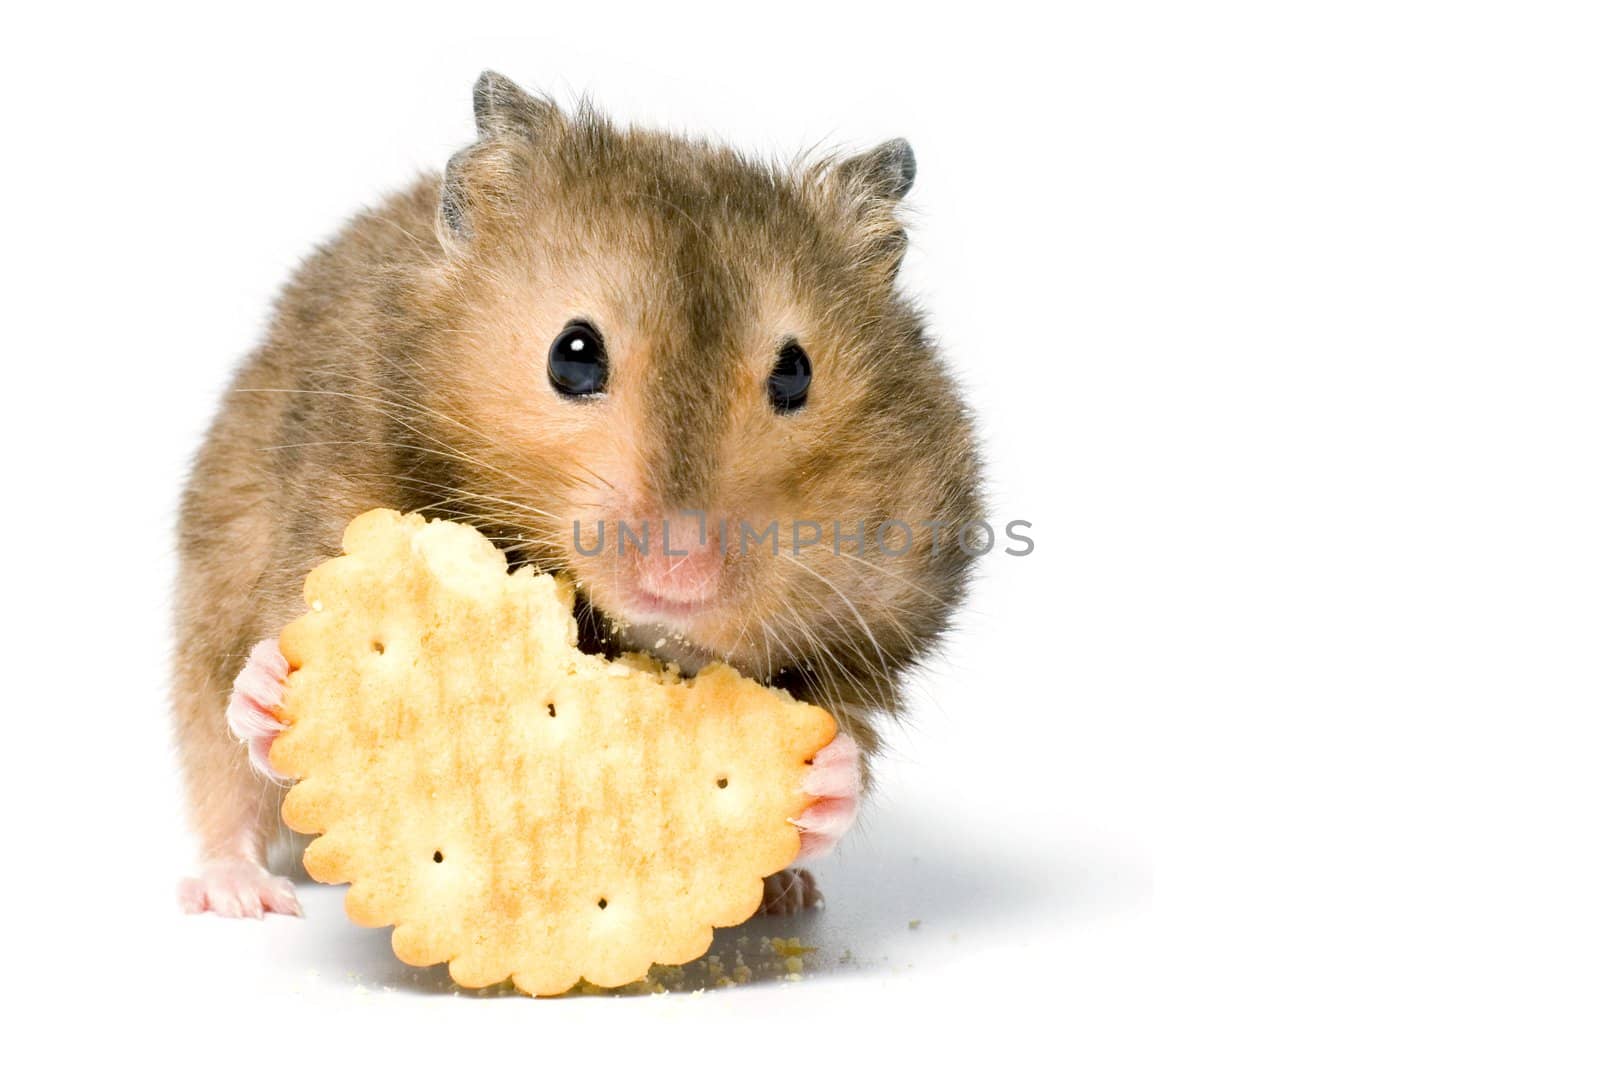 Hungry hamster eating cookie. On white background isolated.